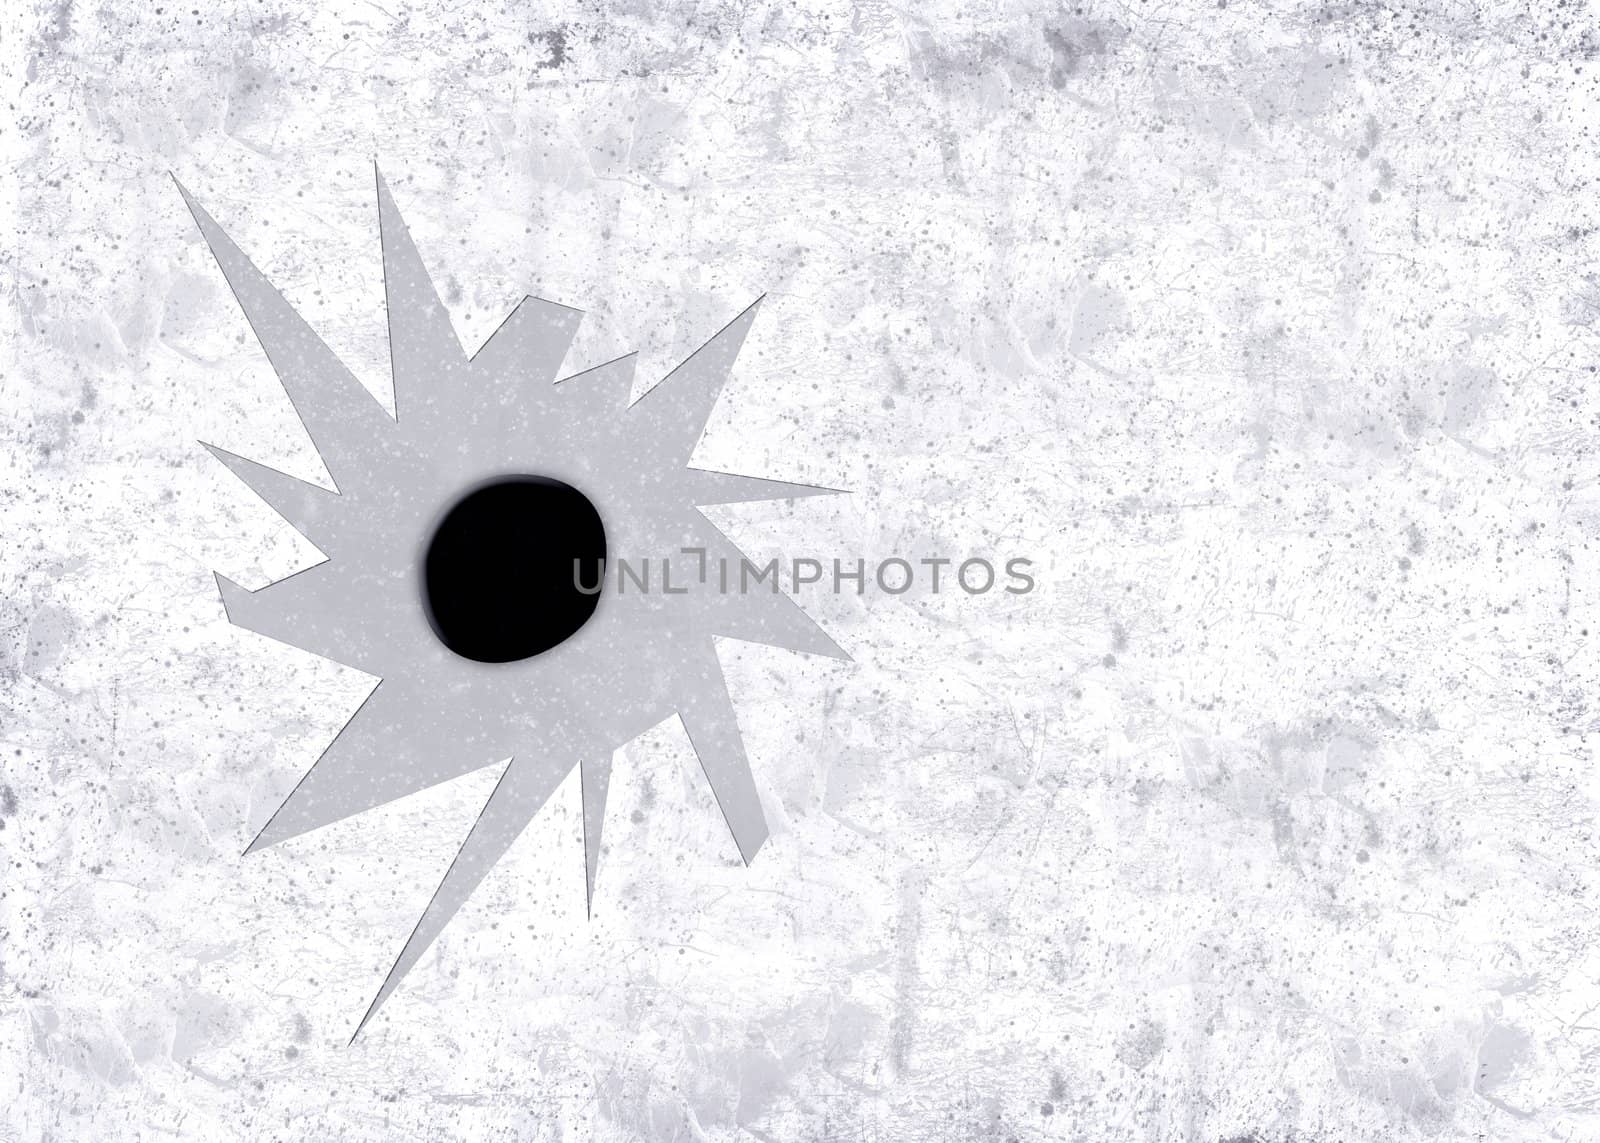 Highly detailed illustration of a bullet hole in aged textured background